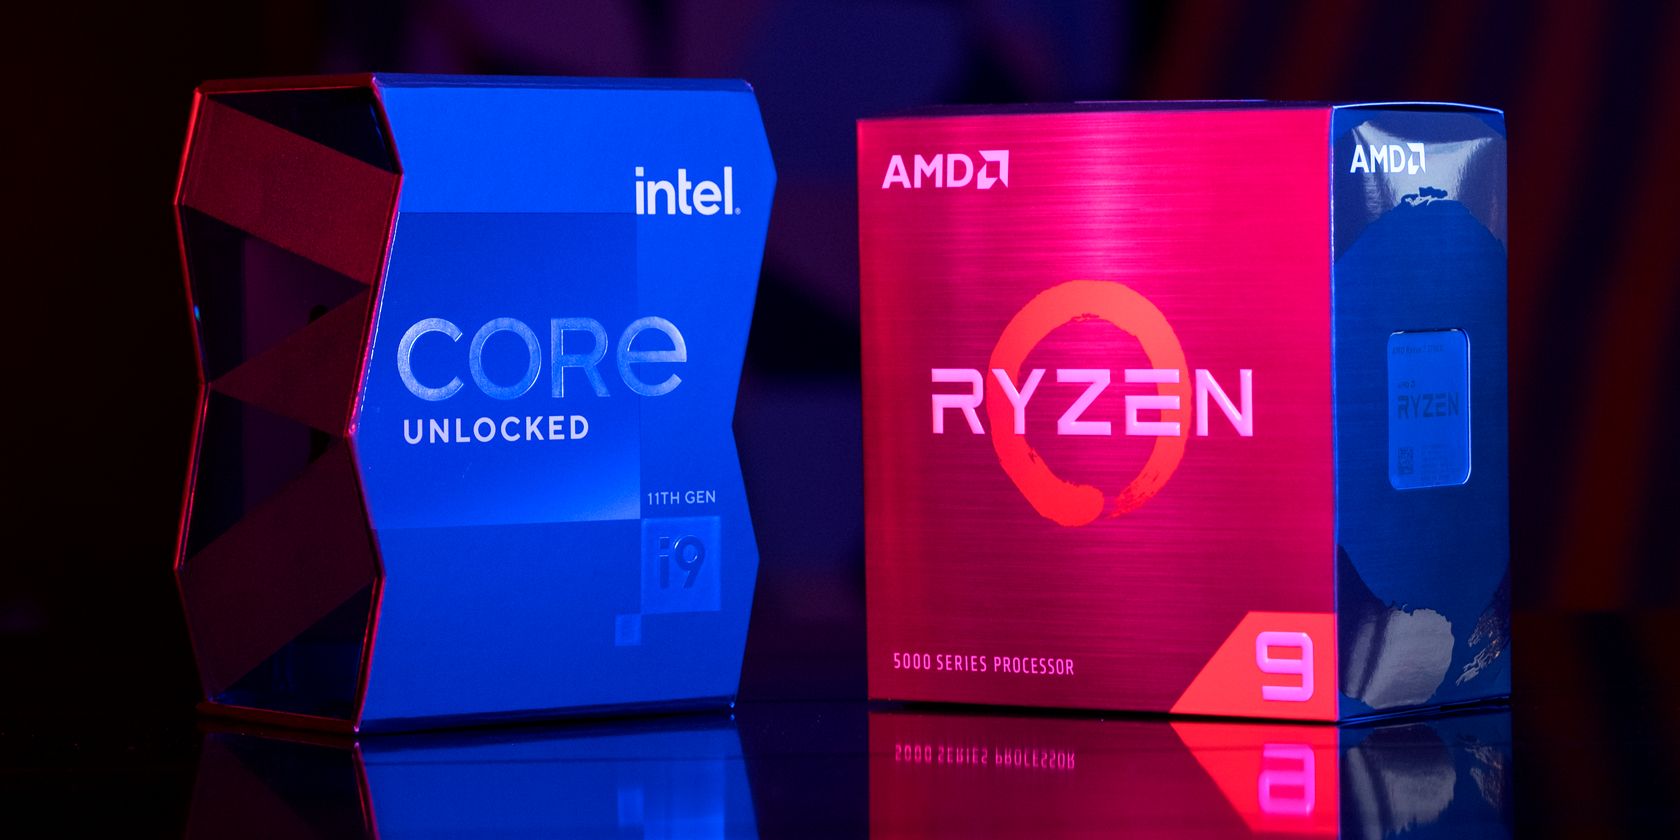 amd ryzen intel core i9 boxes on table feature